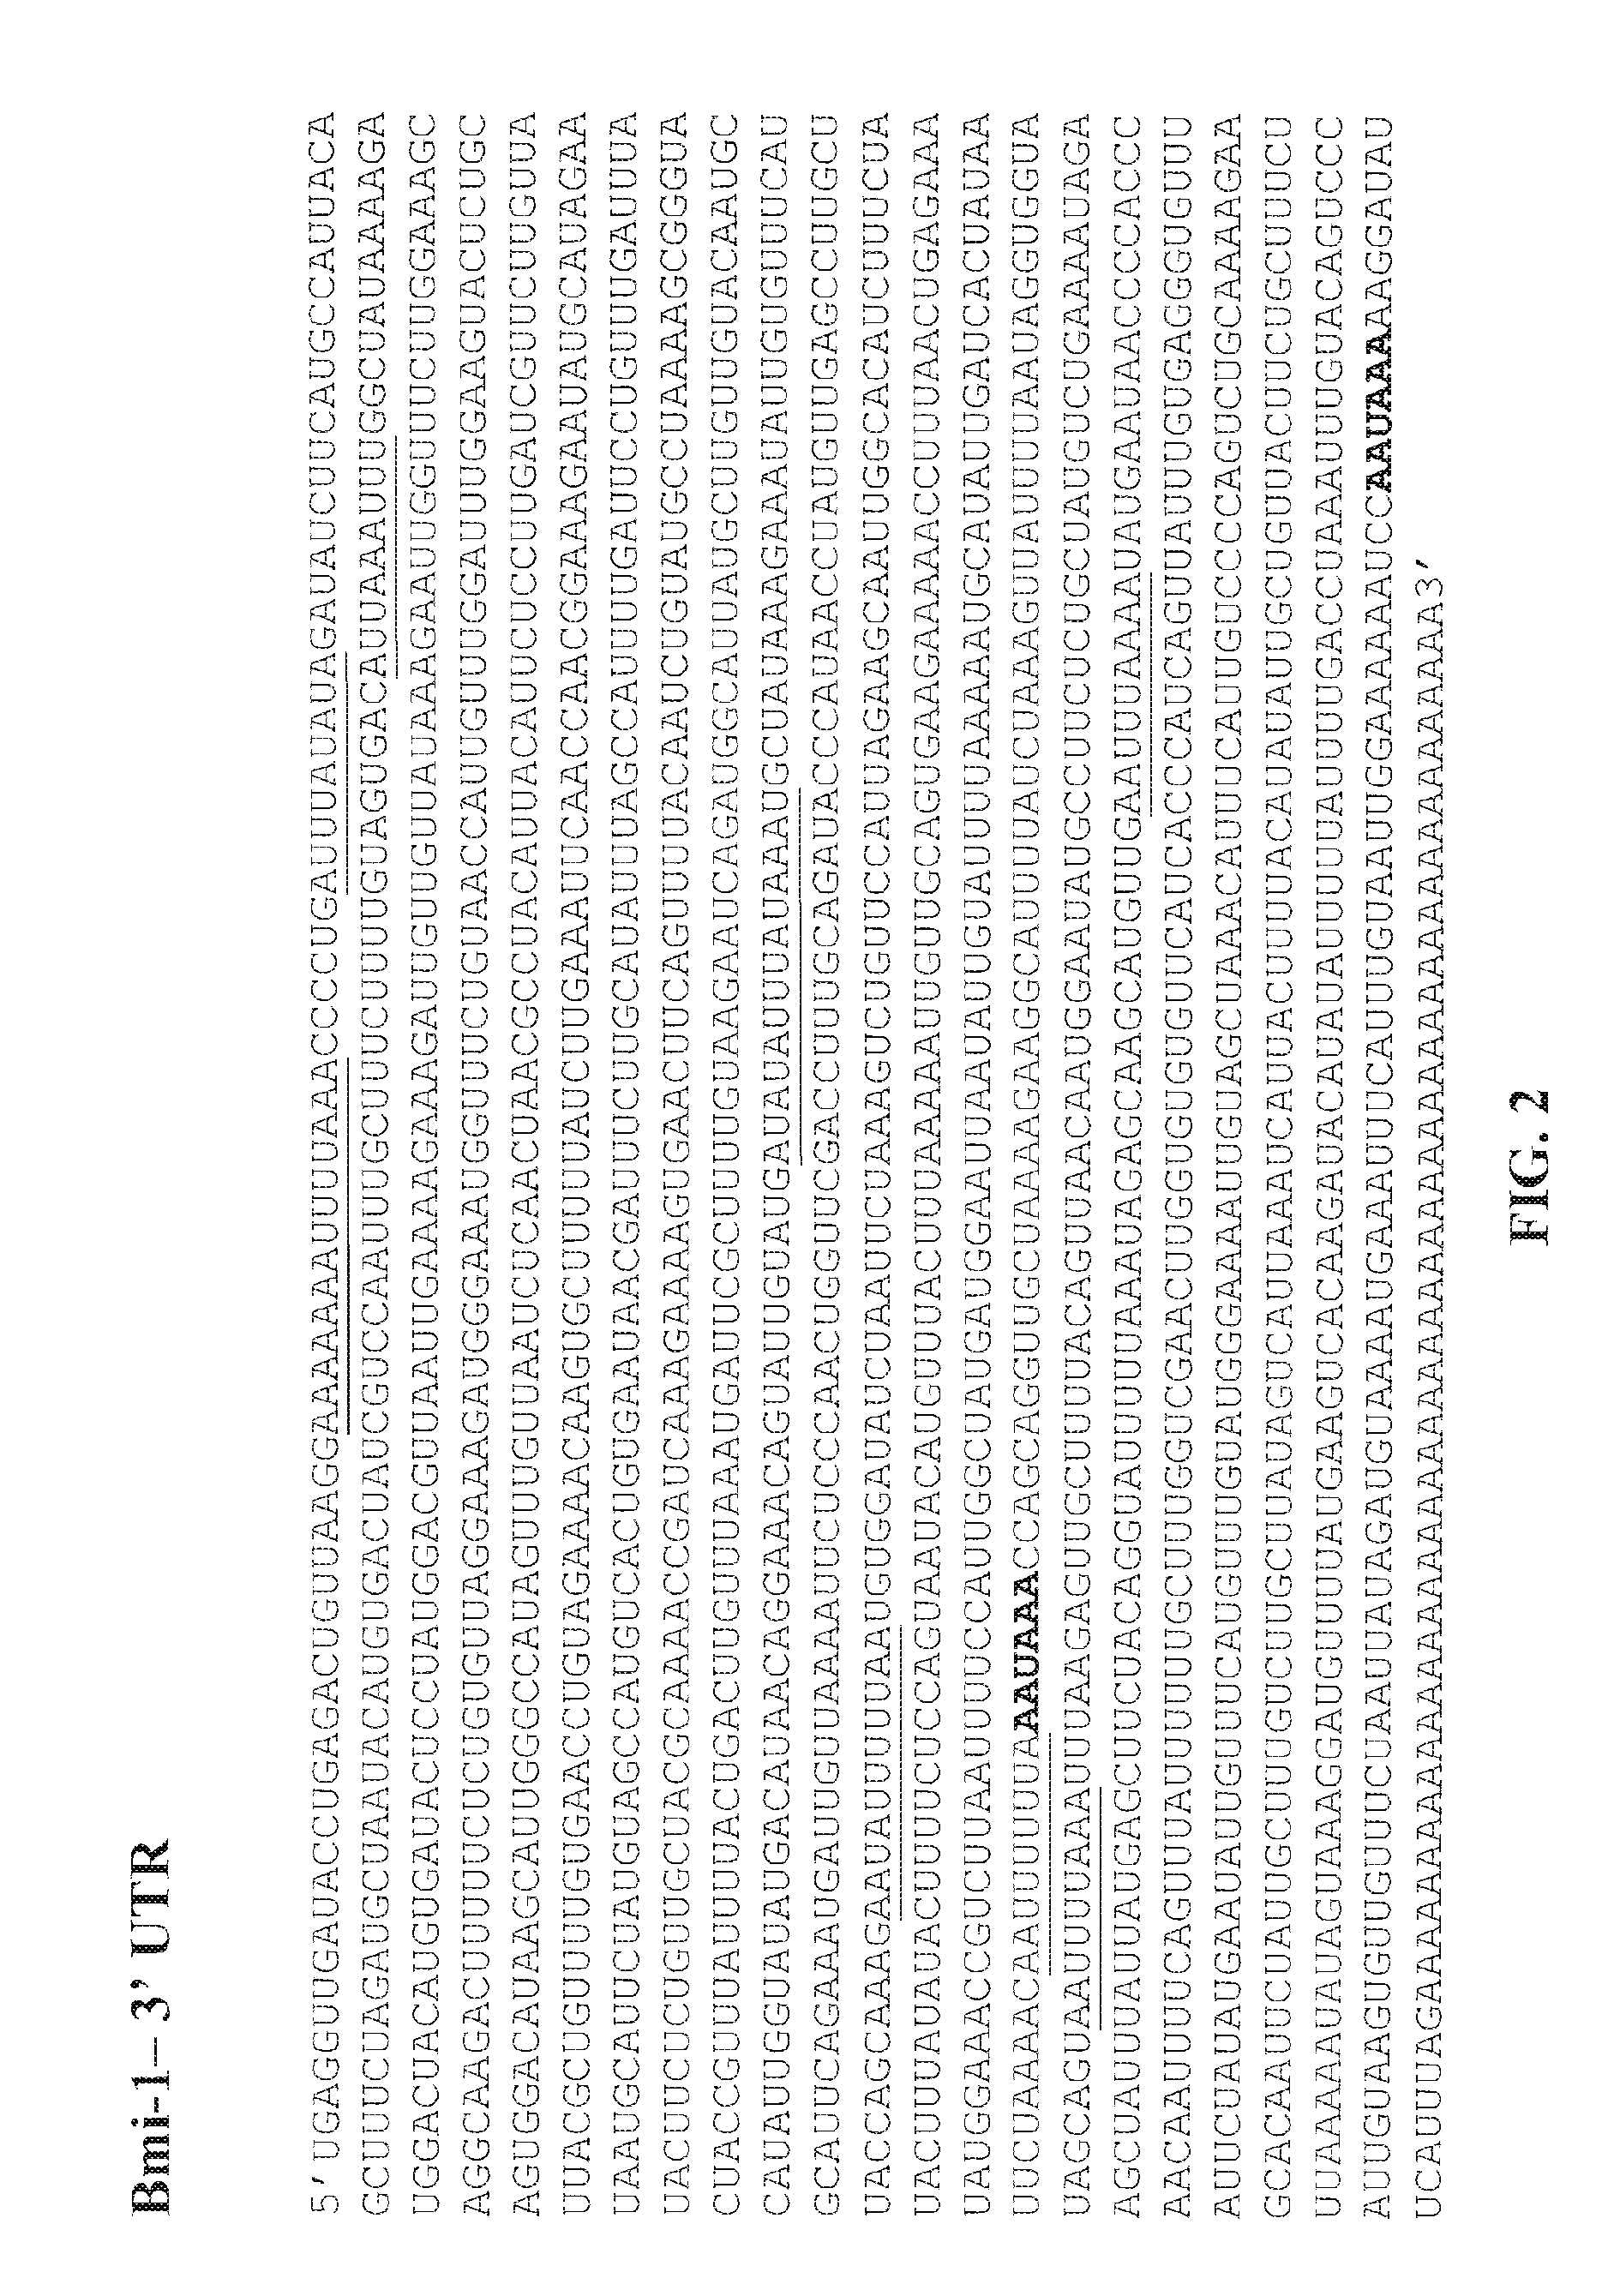 Methods for screening for compounds for treating cancer